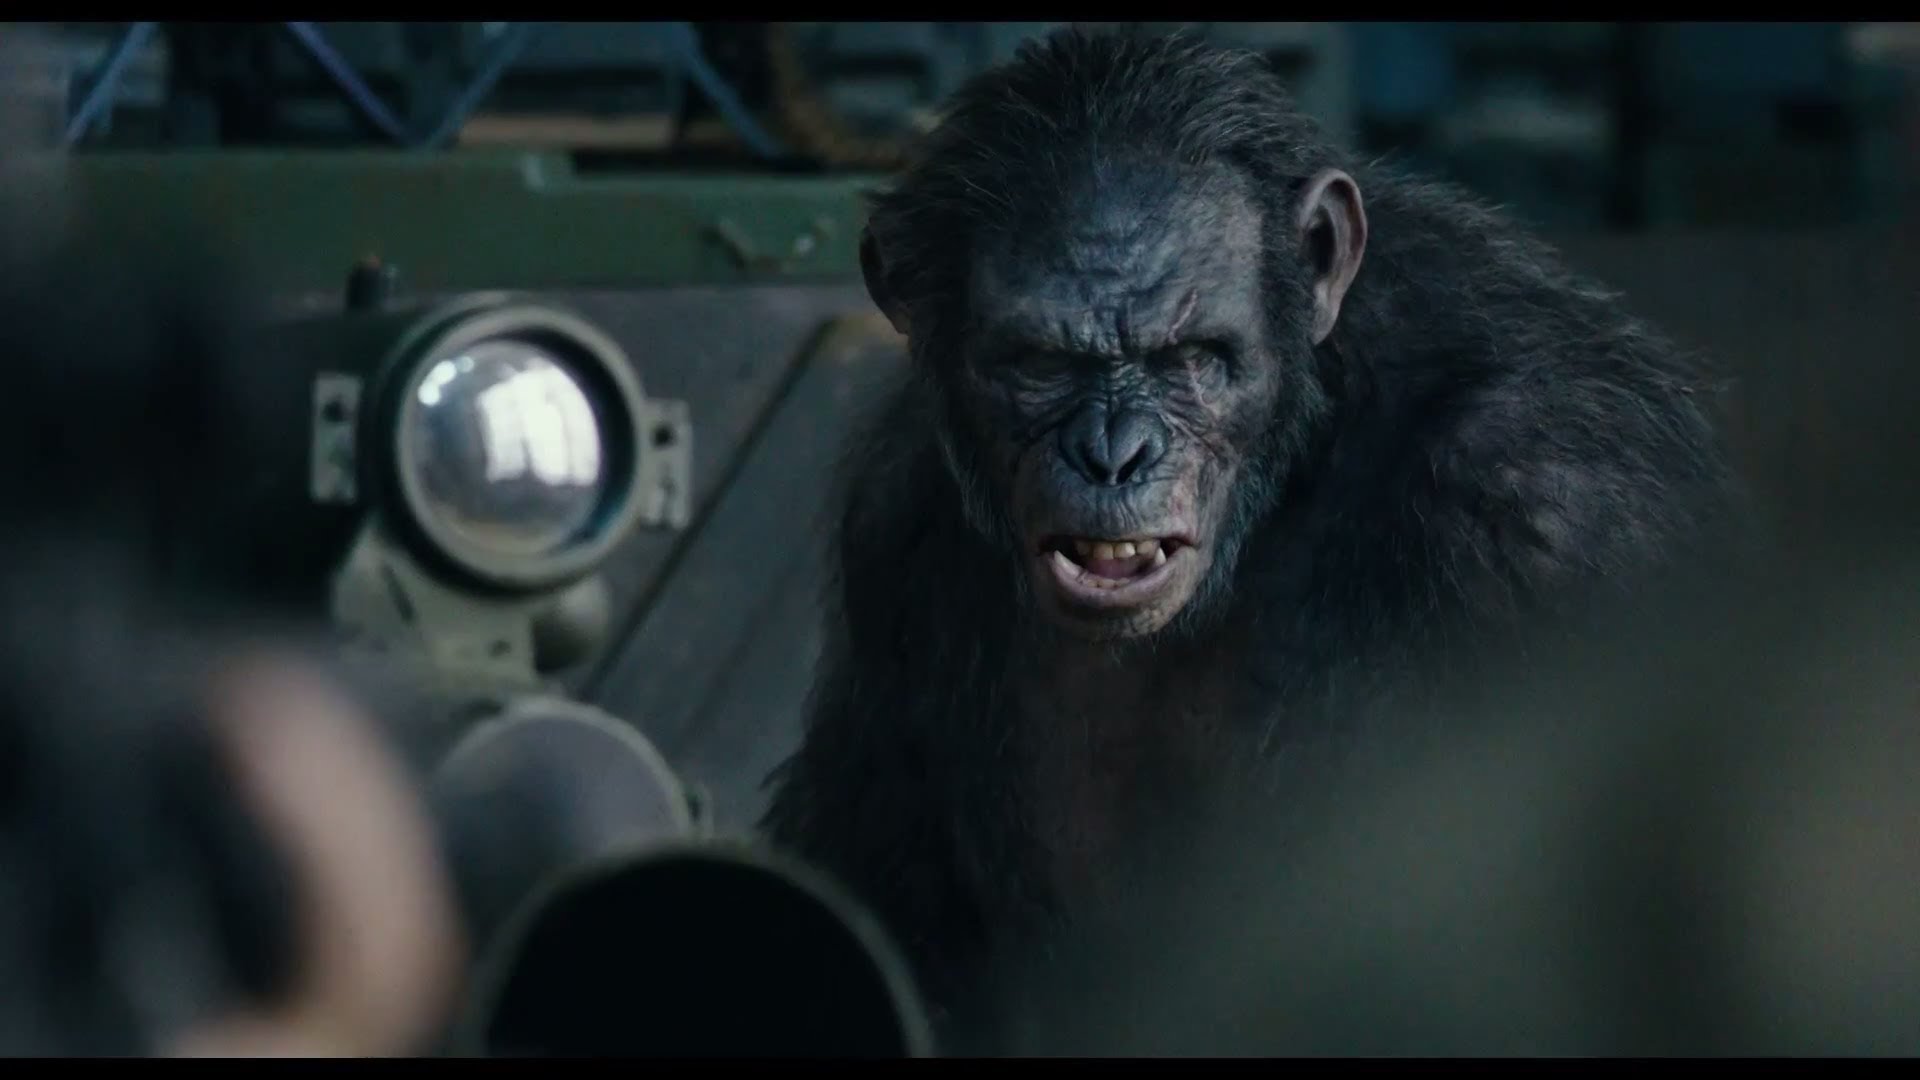 Movie Dawn of the Planet of the Apes HD Wallpaper | Background Image